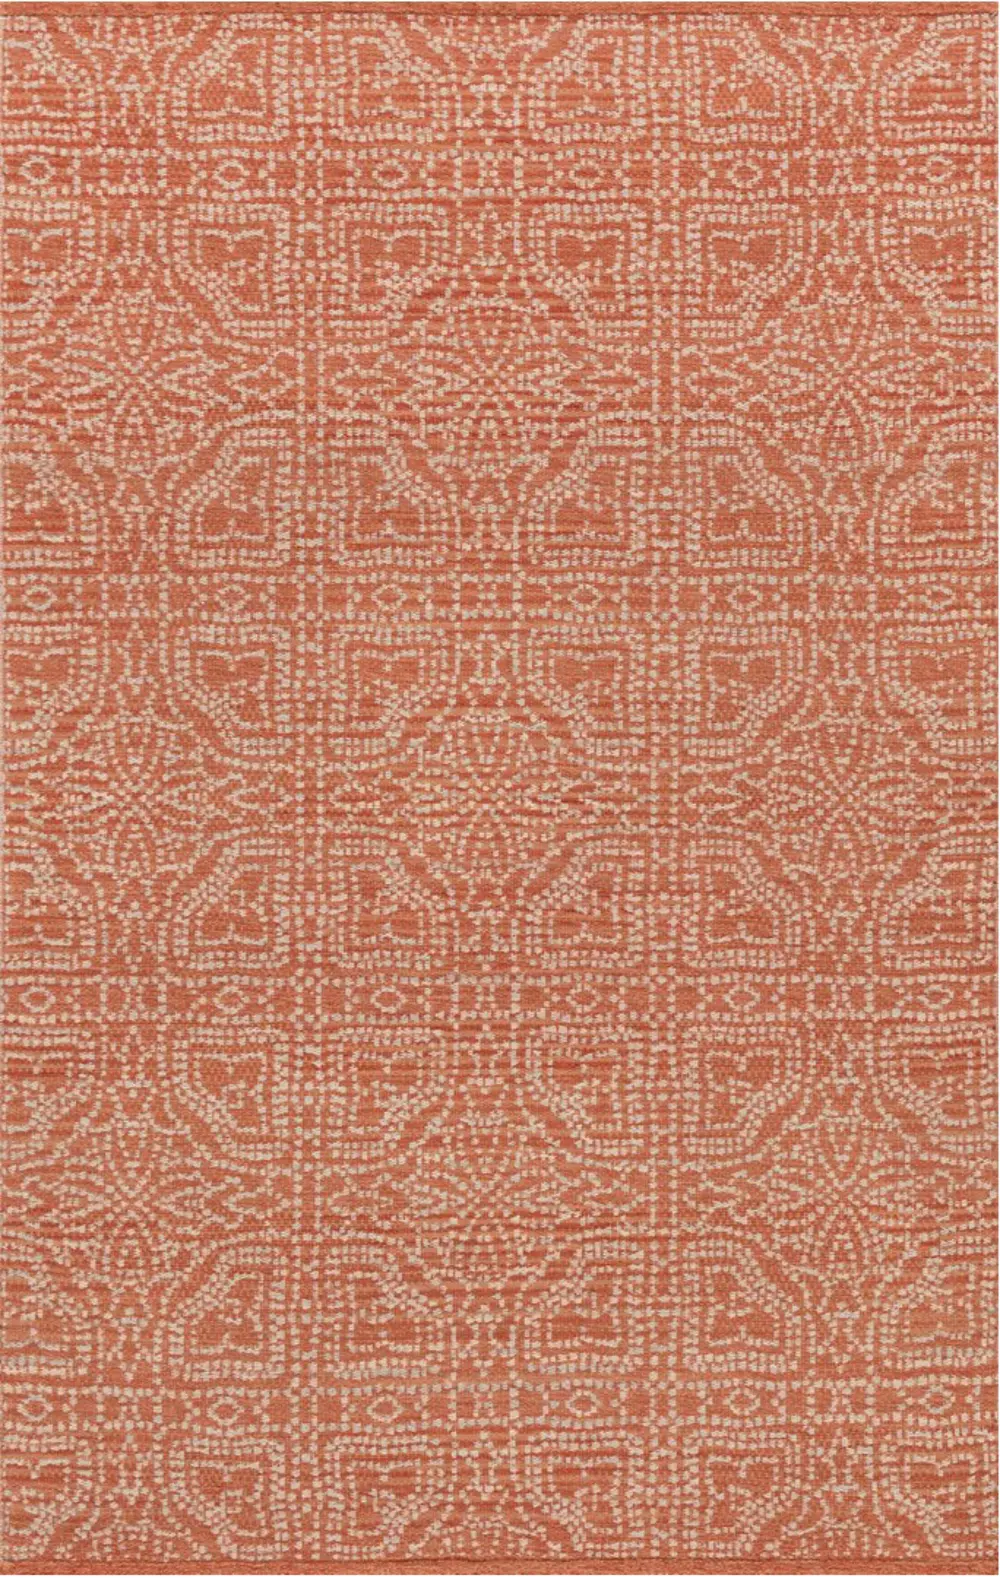 MAGNOLIAHOMEKM03.5.6 Magnolia Home Furniture 3 x 5 Small Red Area Rug - Emmie Kay-1